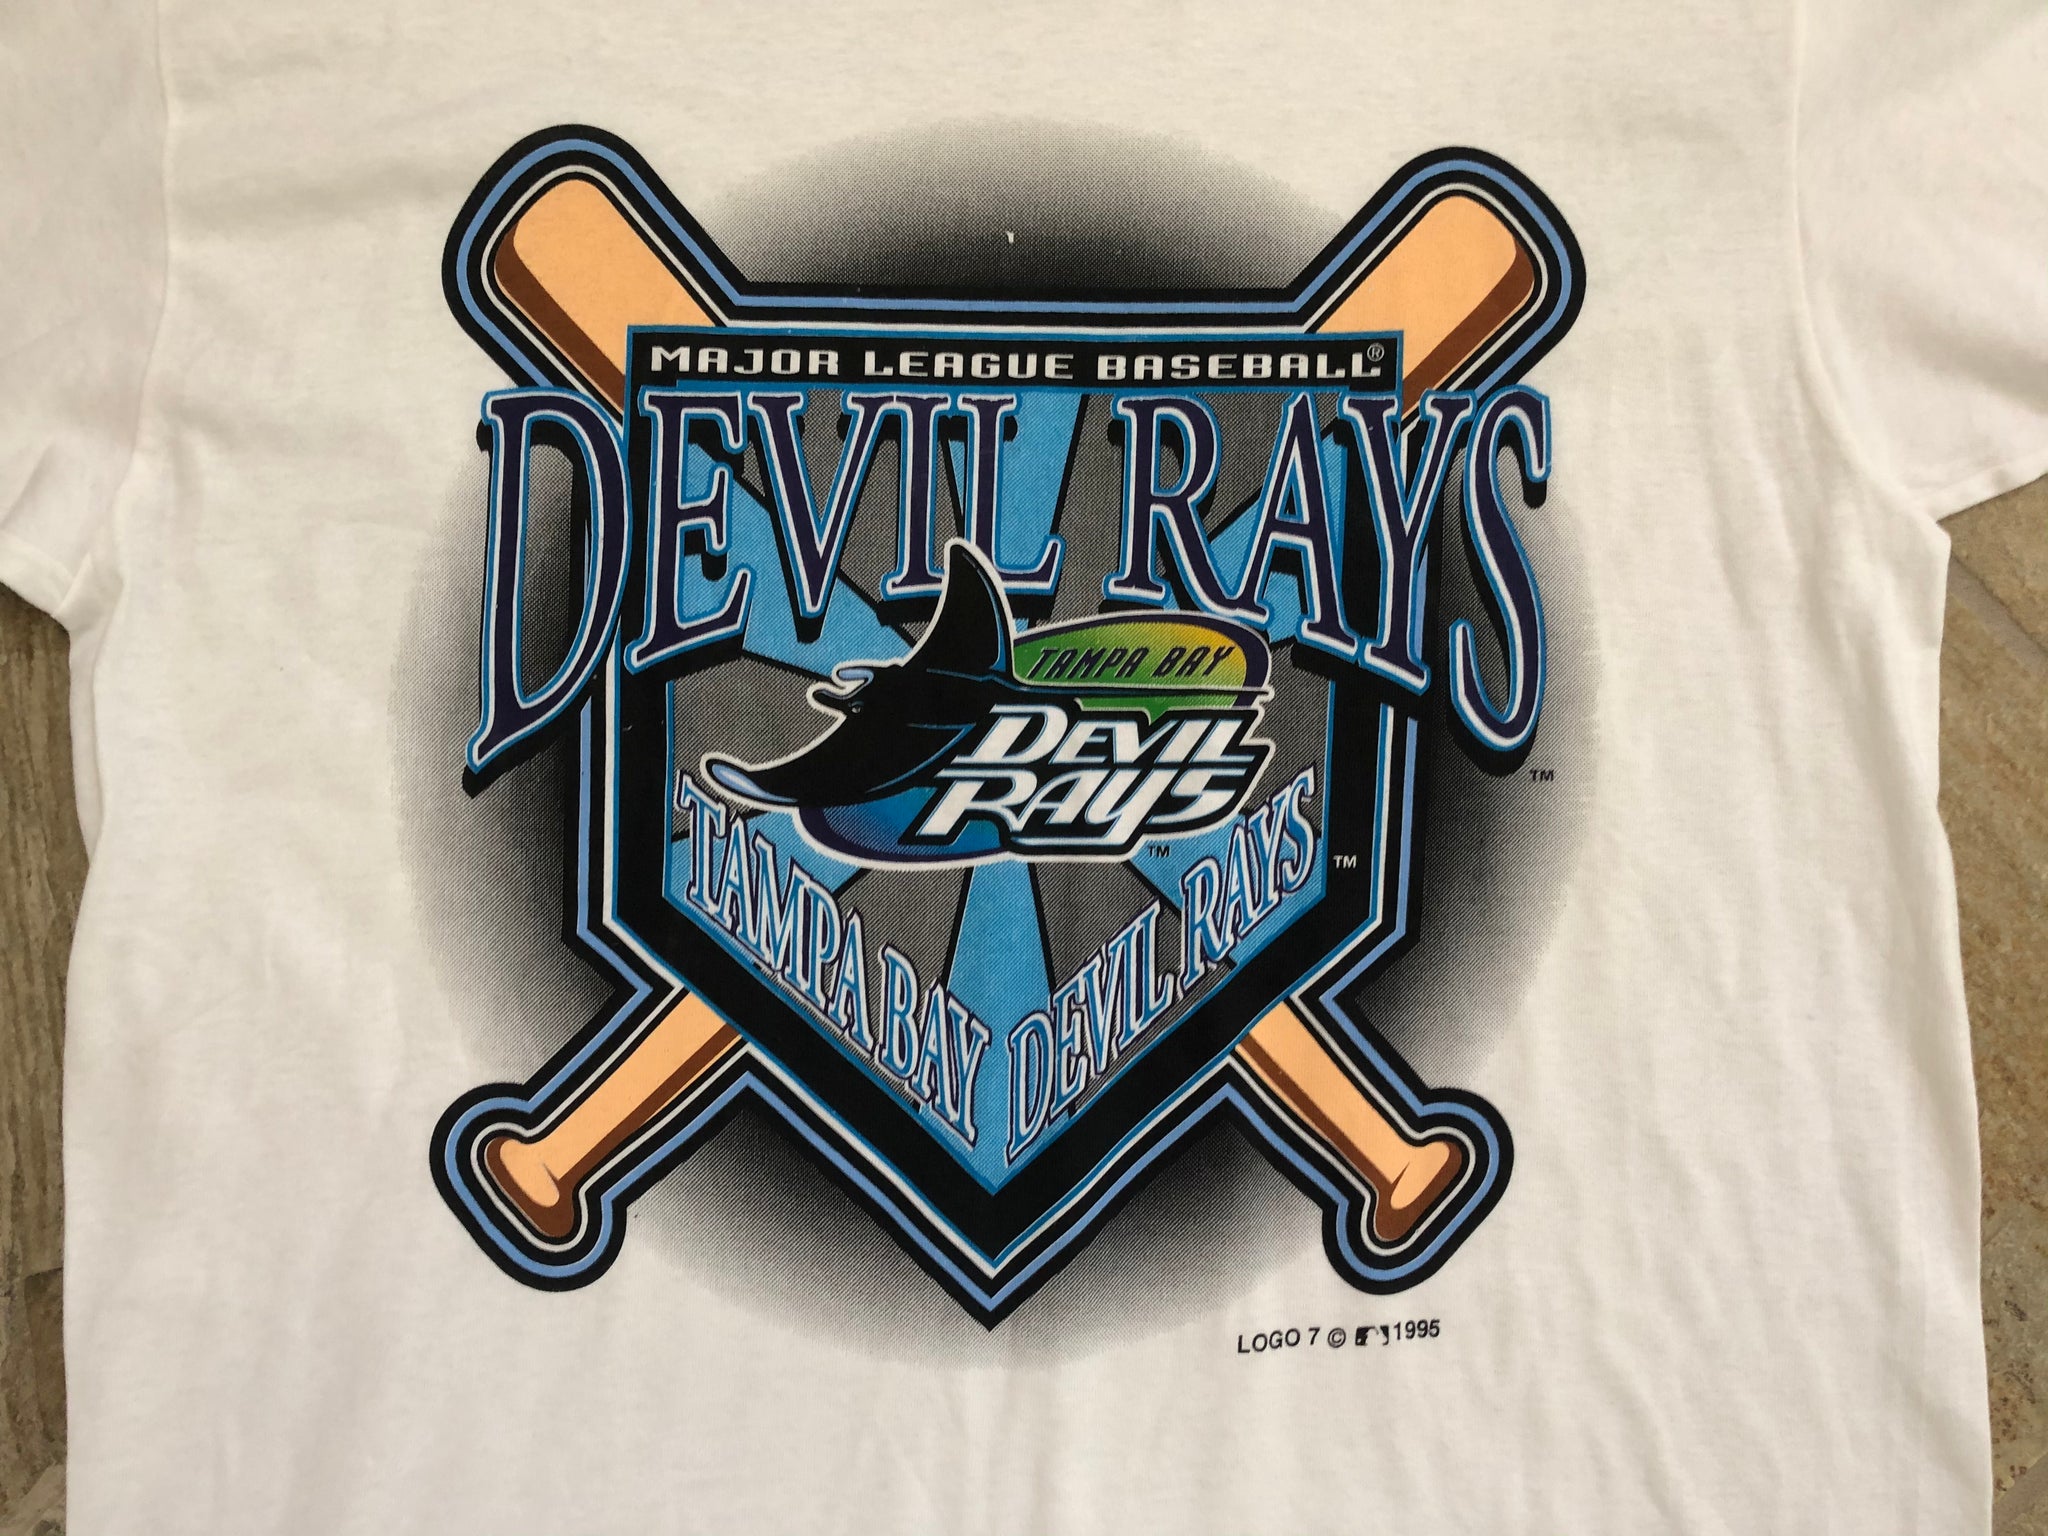 Tampa Bay Rays Devil MLB Shirts for sale